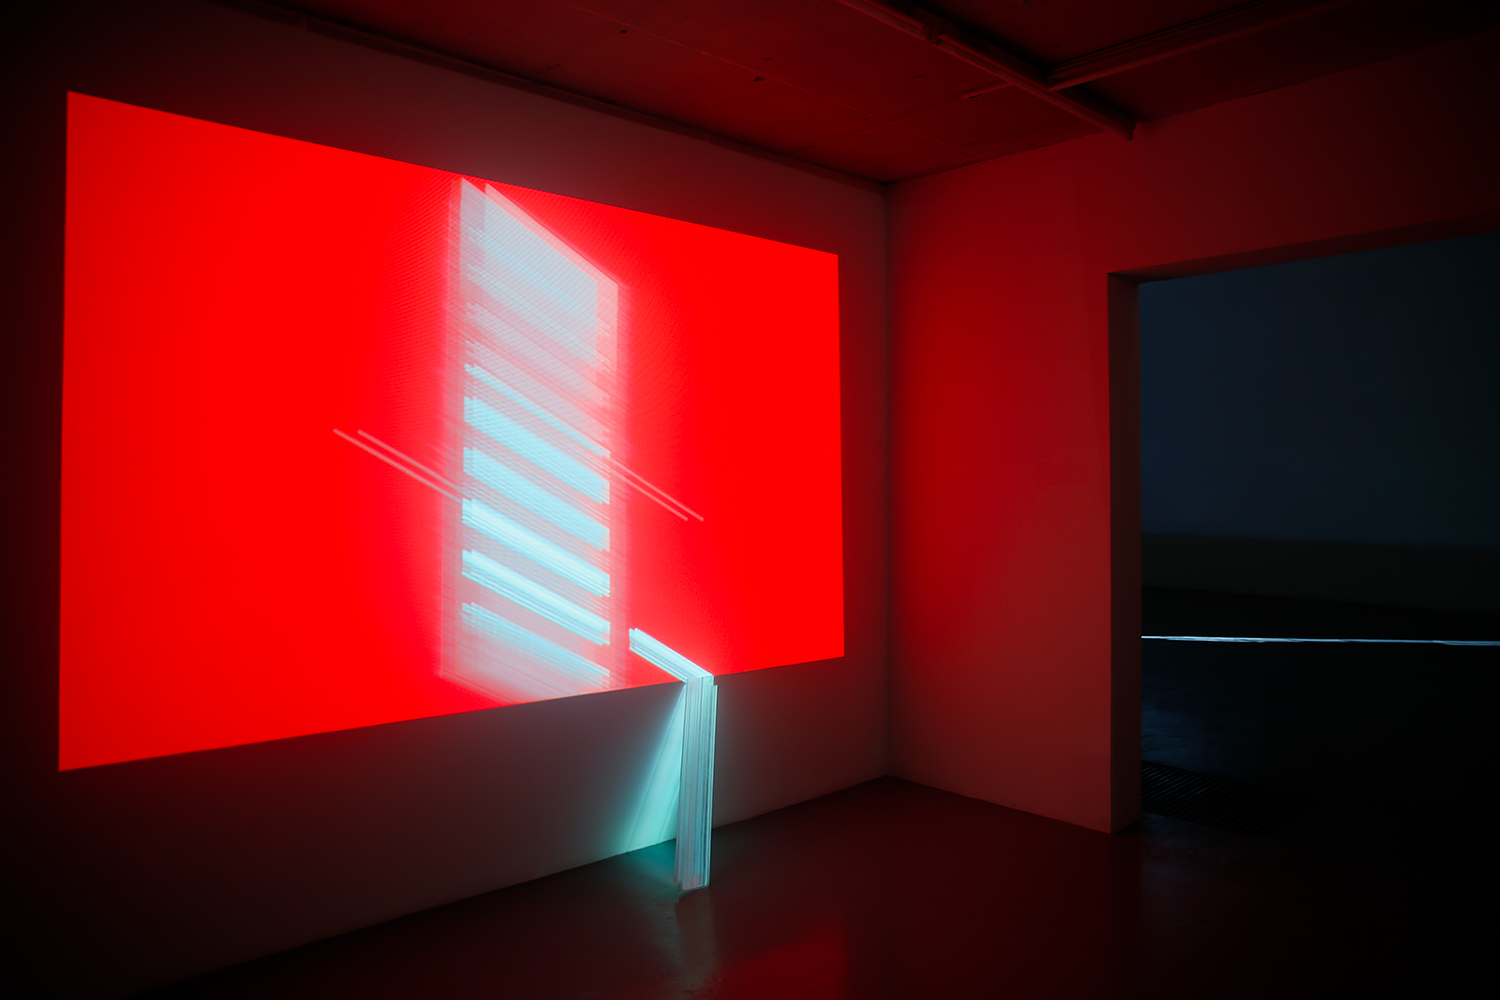 Installation containing projection of one digital still image on wall and another still image mapped onto accompanying CNC-routed acrylic object abutting wall 